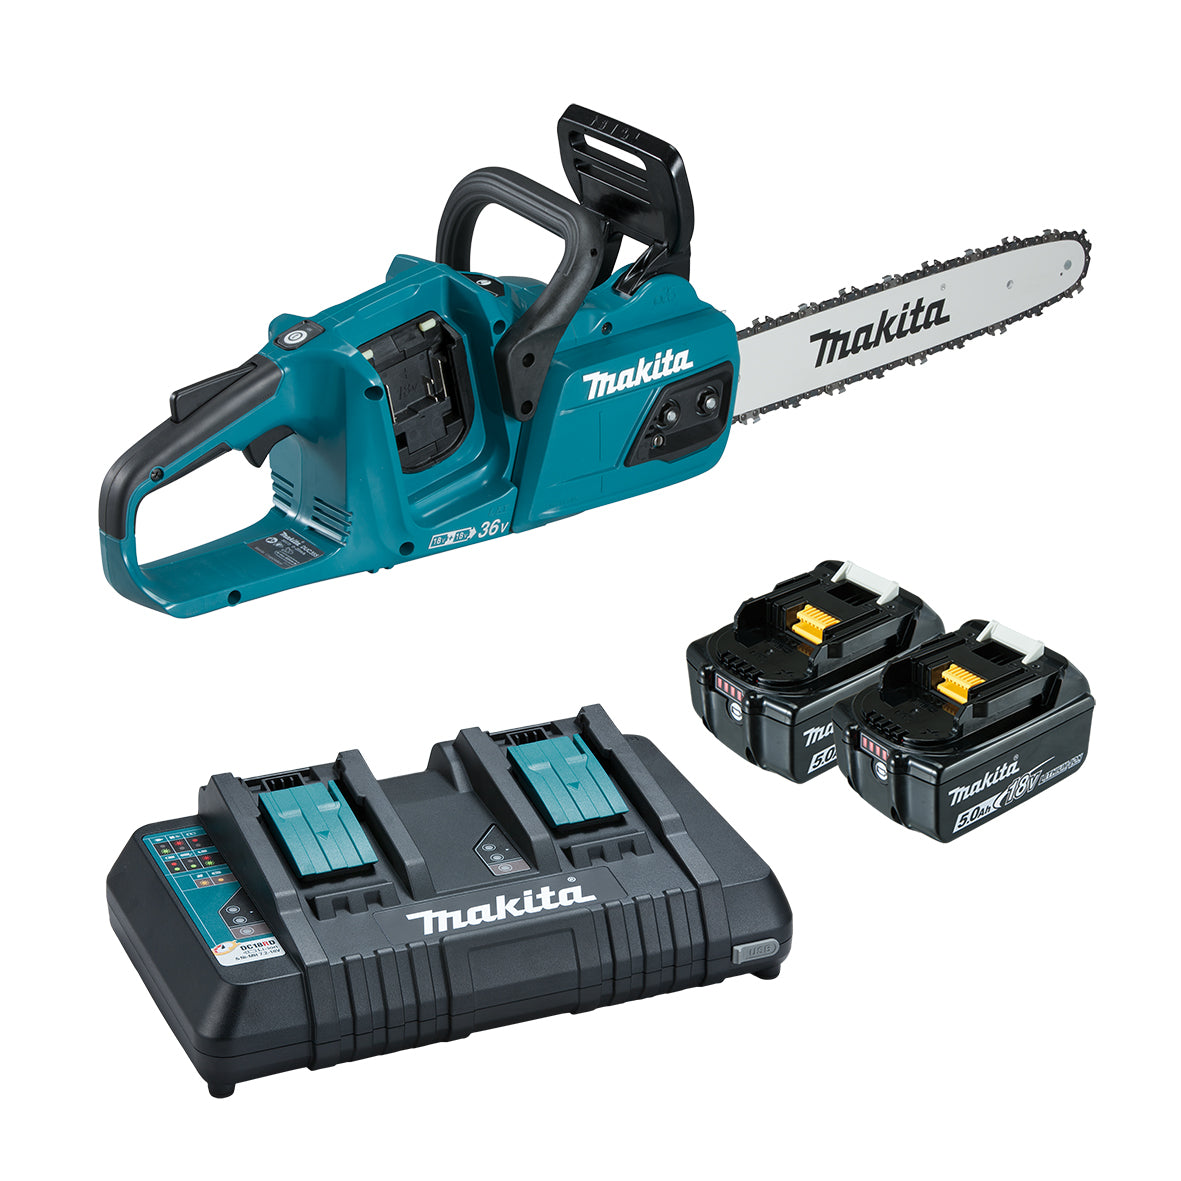 18Vx2 5.0Ah 400mm 16" Brushless Chainsaw Kit DUC405PT2 by Makita